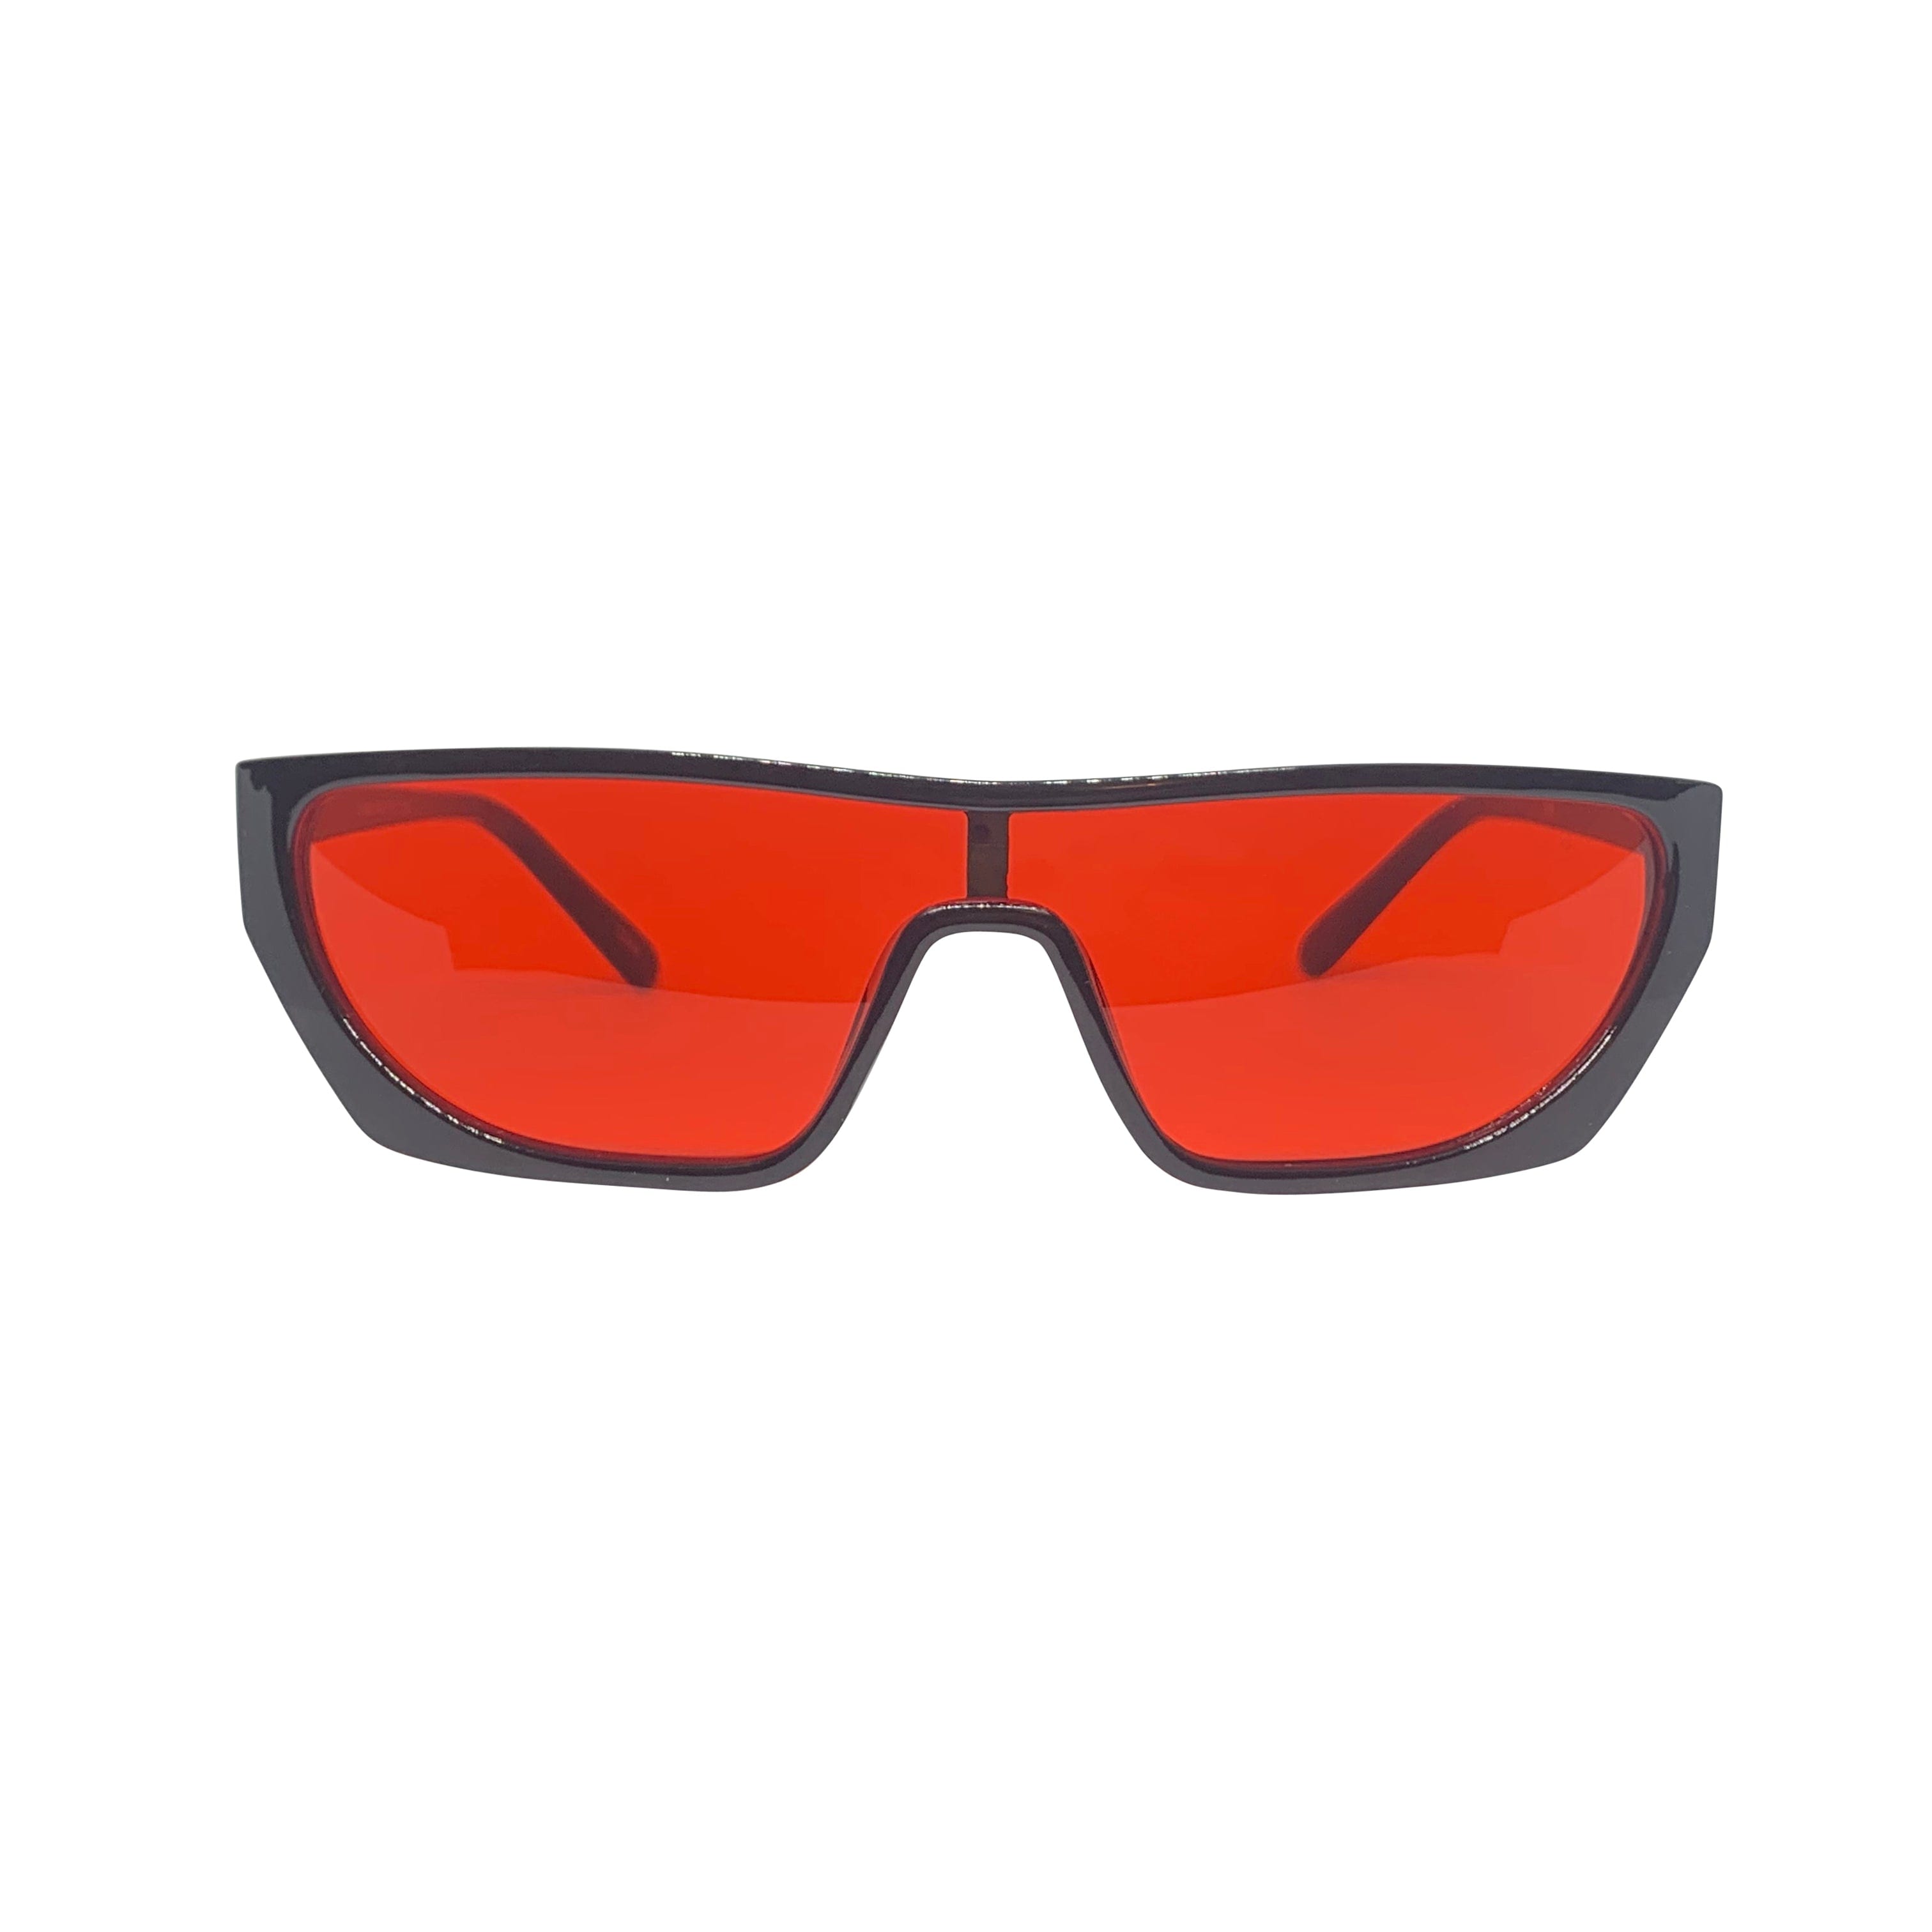 PAPI Red and Black Shield Sunnies